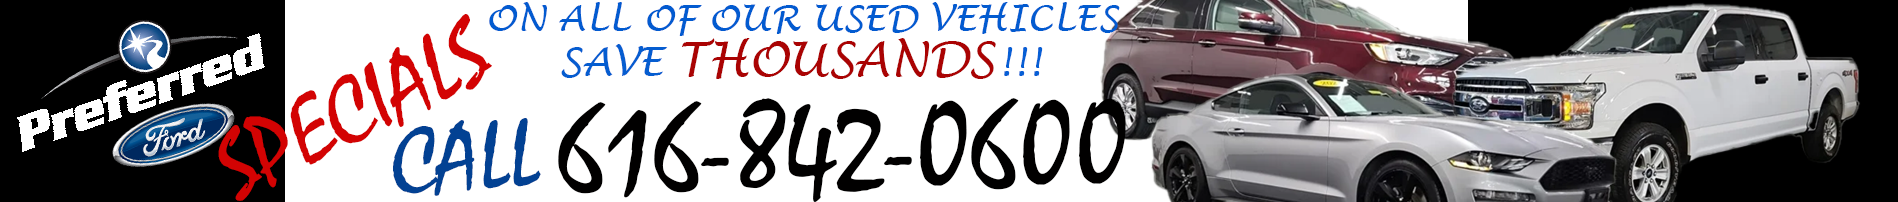 Specials on all our used vehicles, save thousands